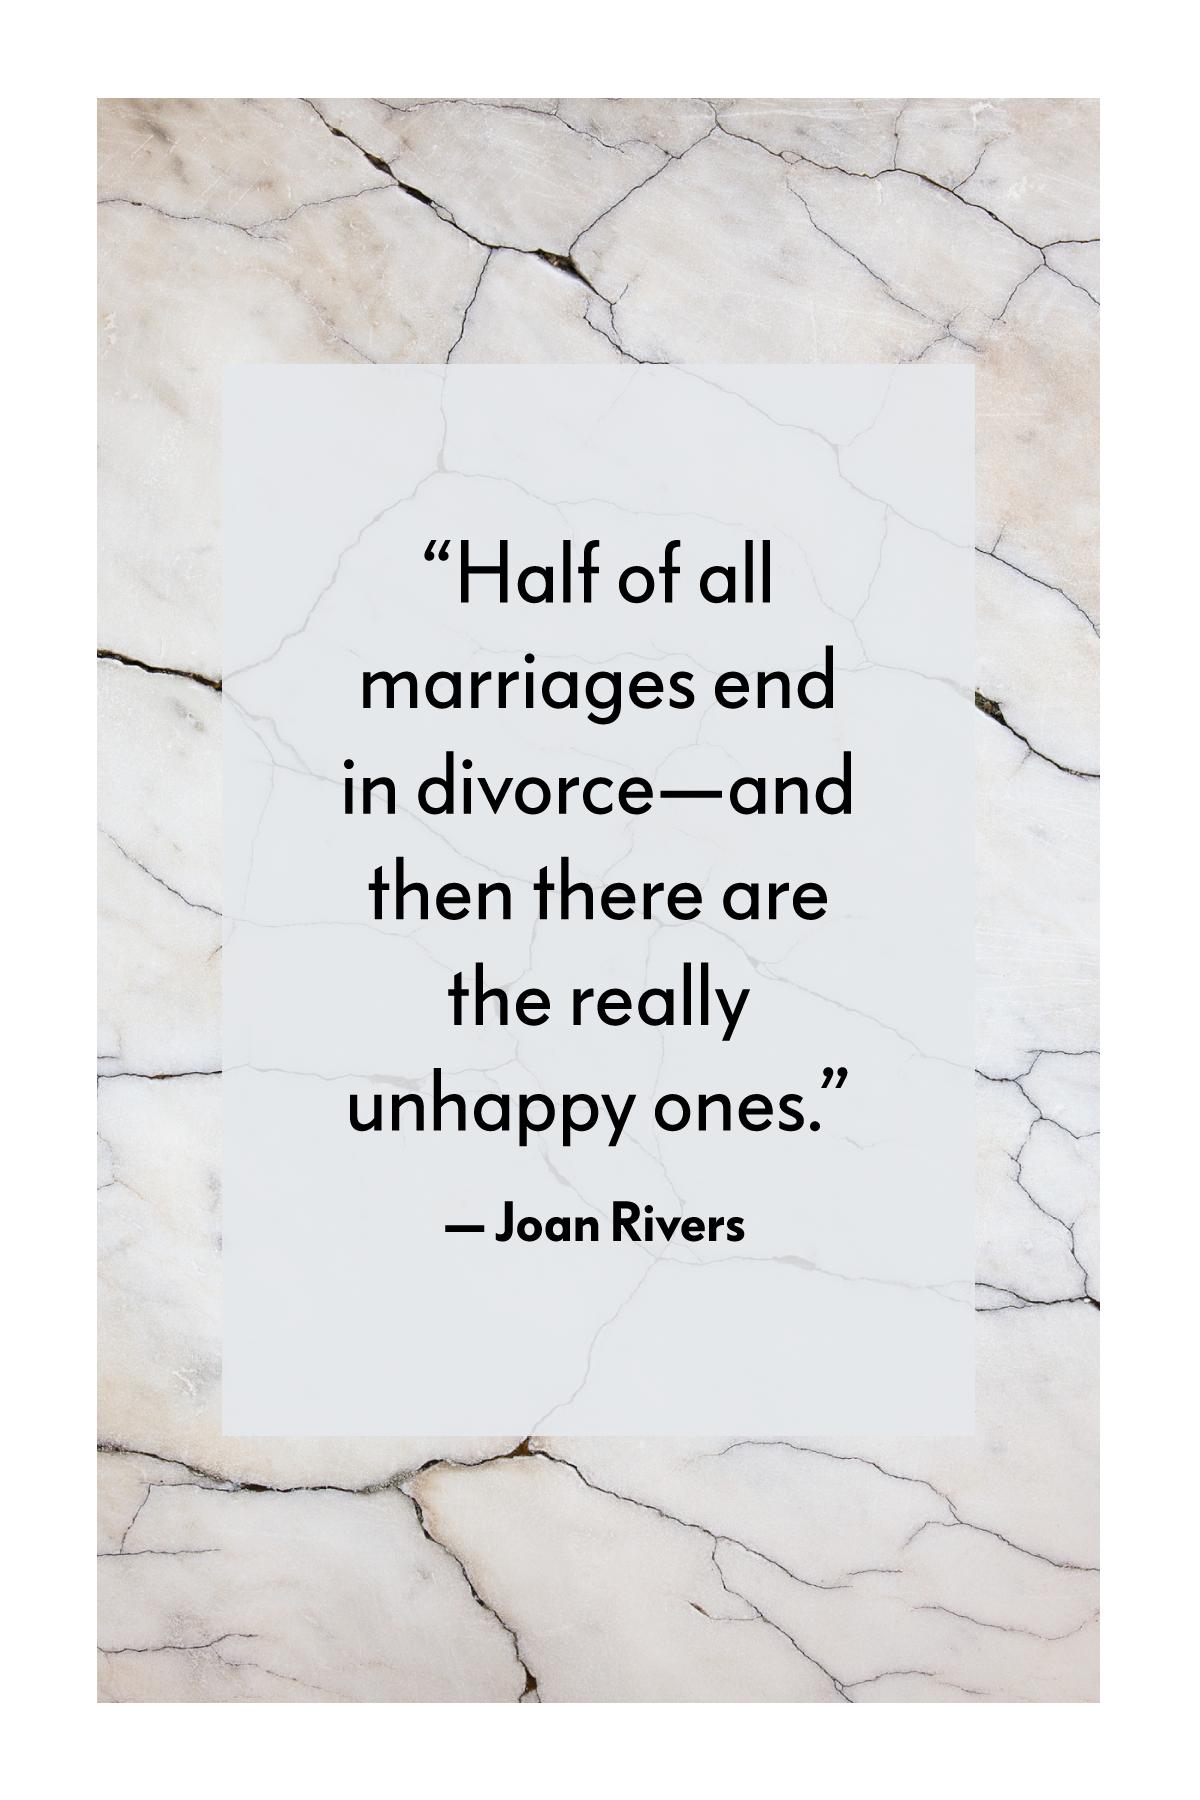 Quotes marriage after divorce 7 Key